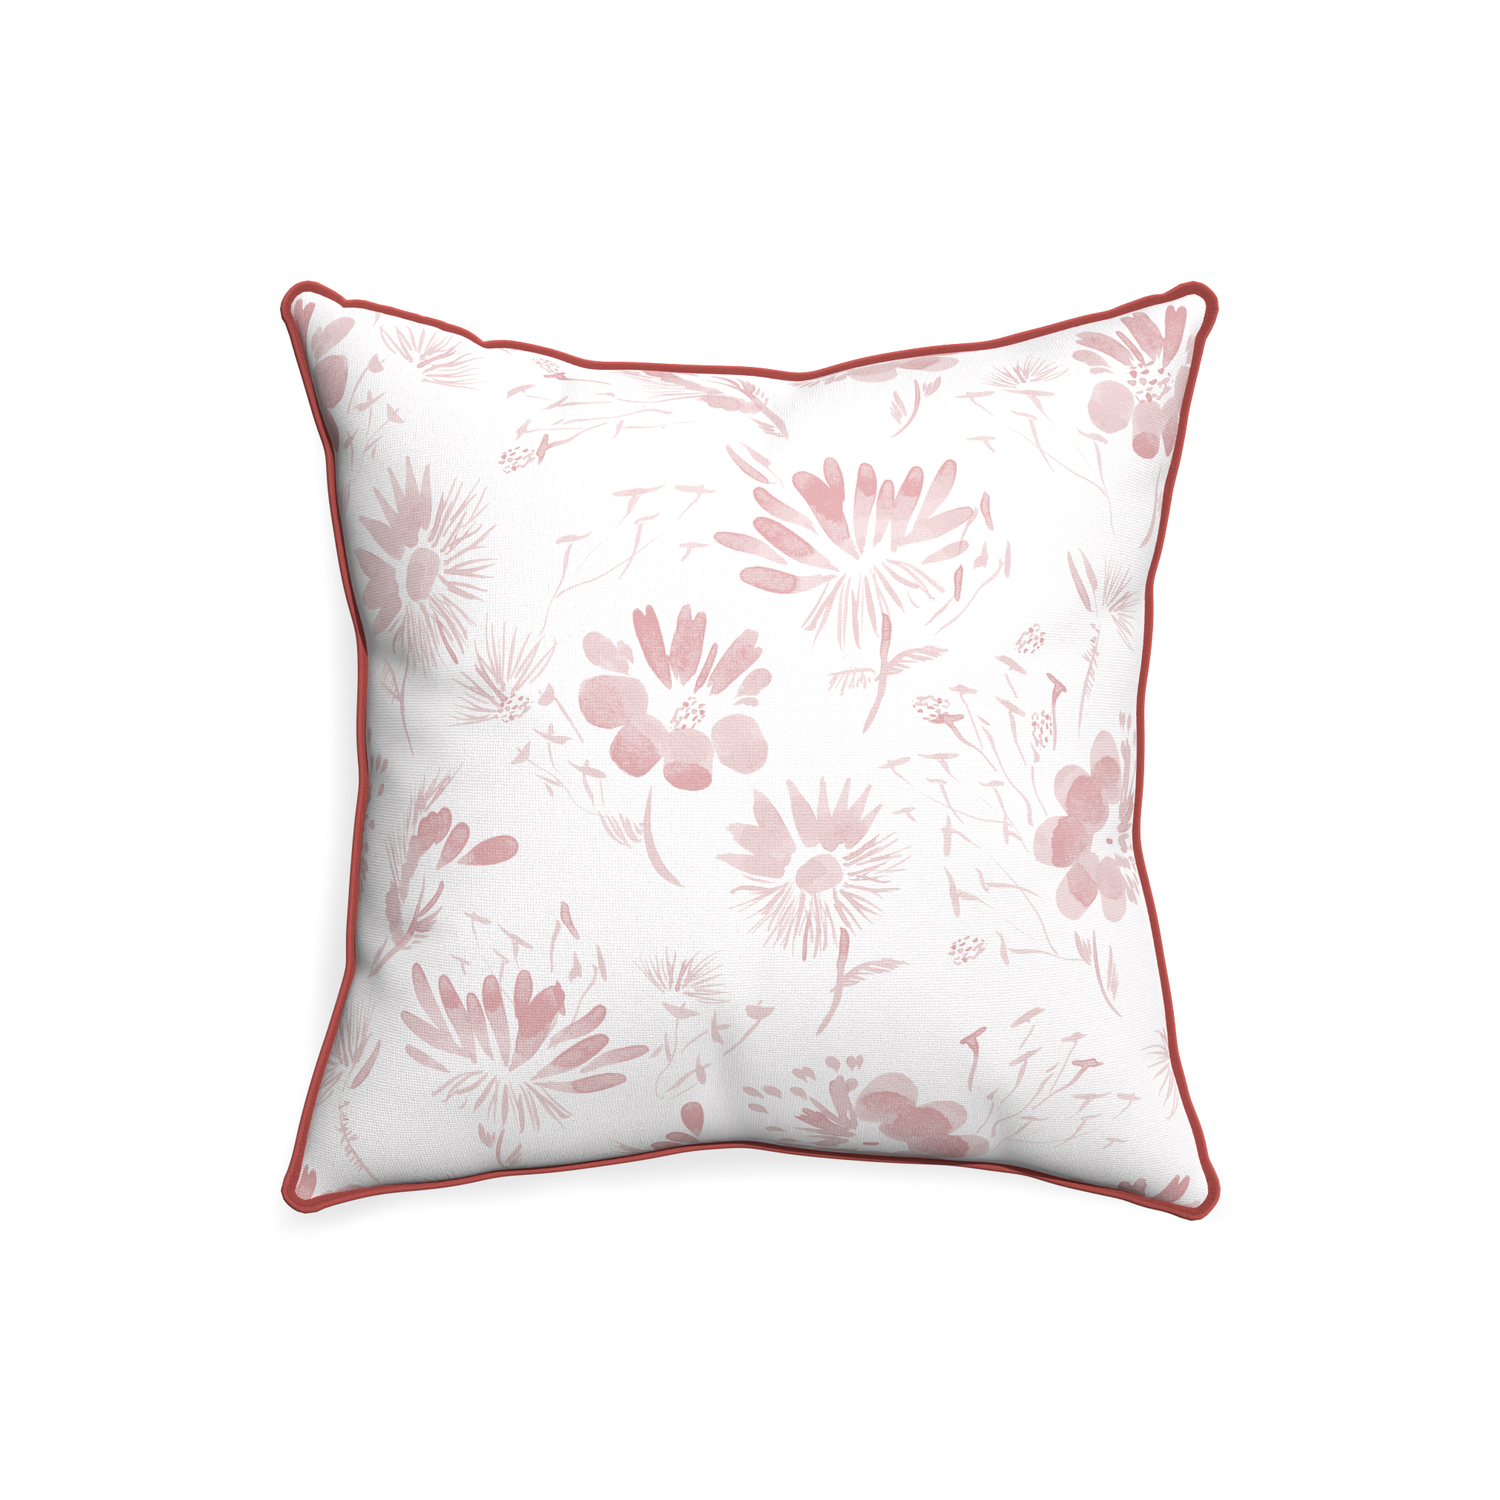 20-square blake custom pink floralpillow with c piping on white background